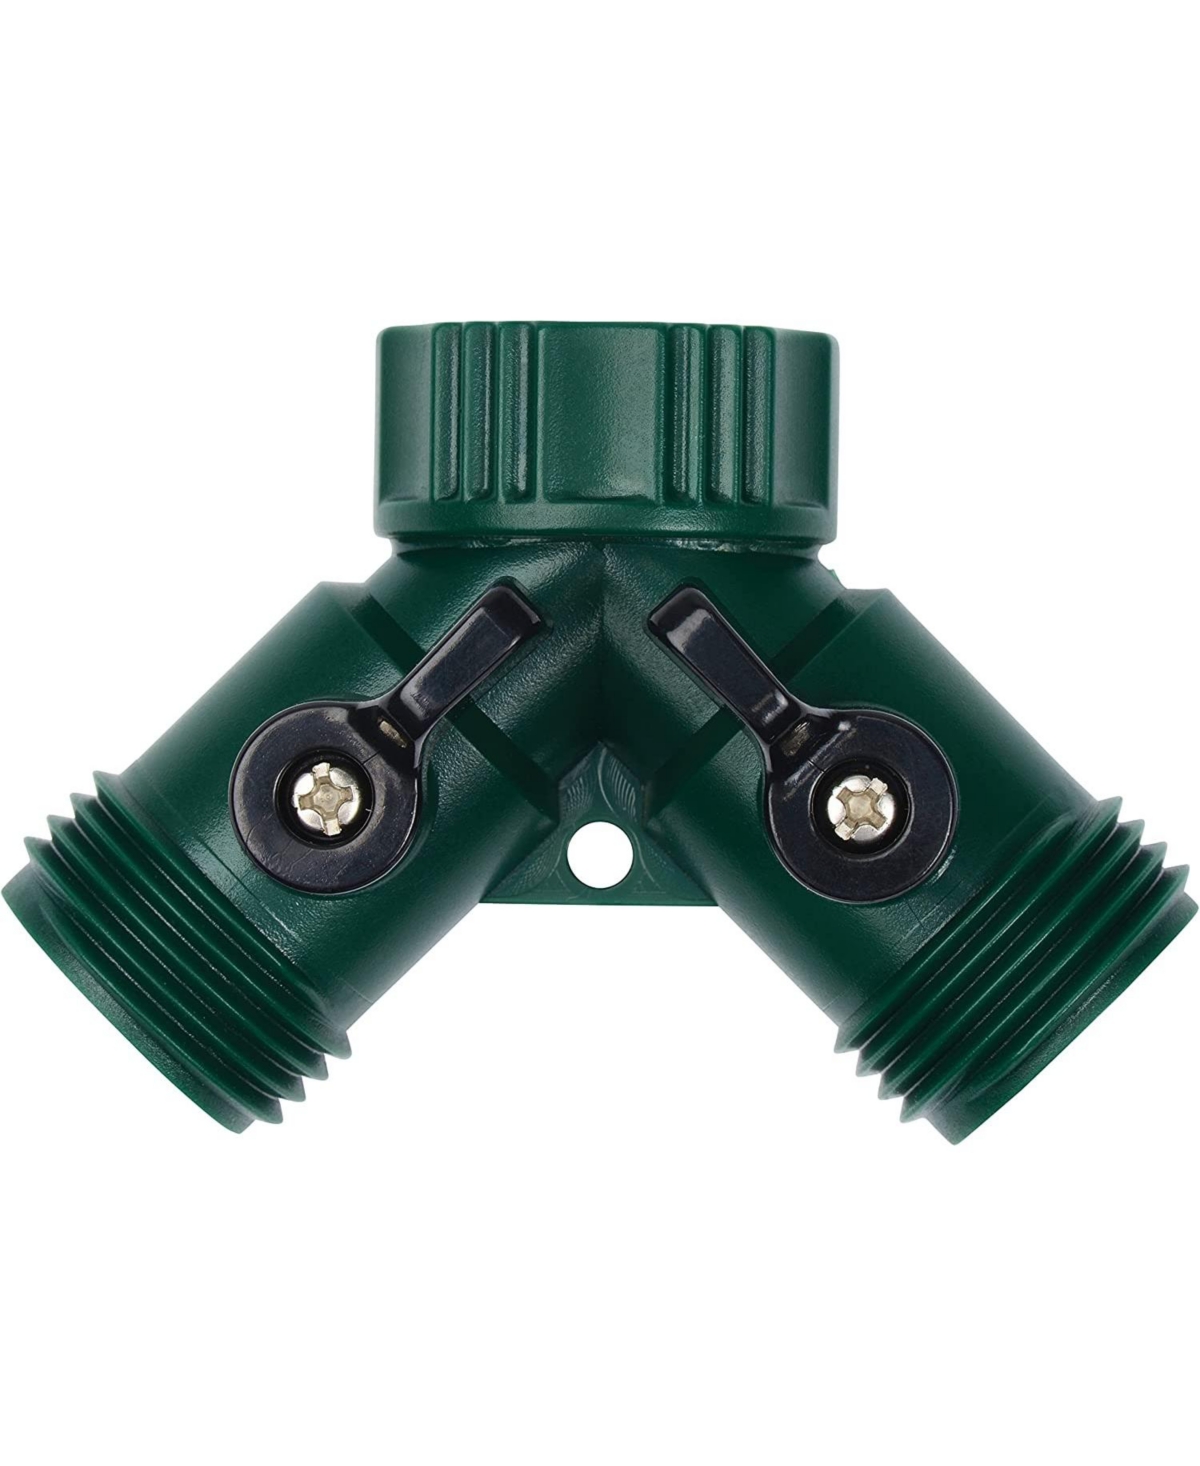 313S 2-Way Plastic Hose Valve Connector with Built-in Shut-offs Qty 1 - Green